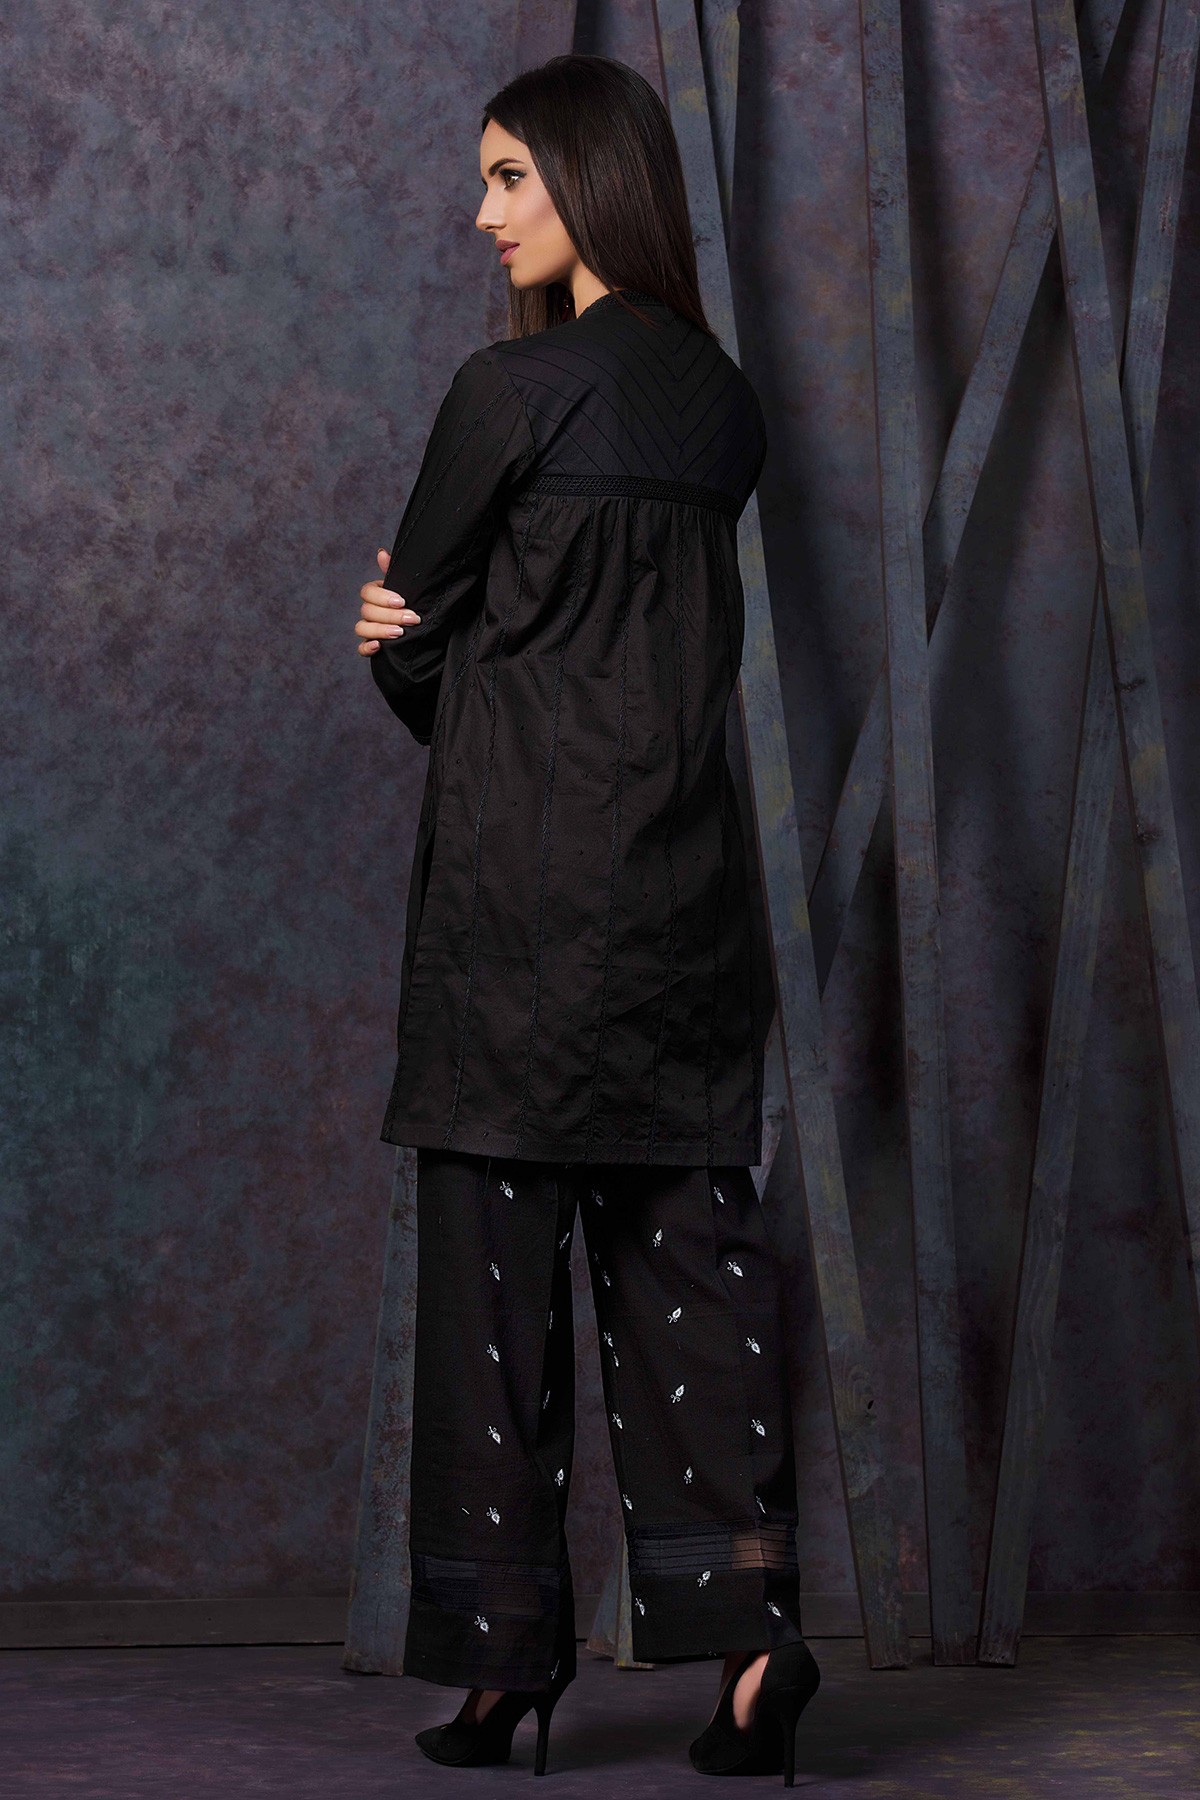 Embroidered black satin pret wear dress by kayseria new arrivals 2018 